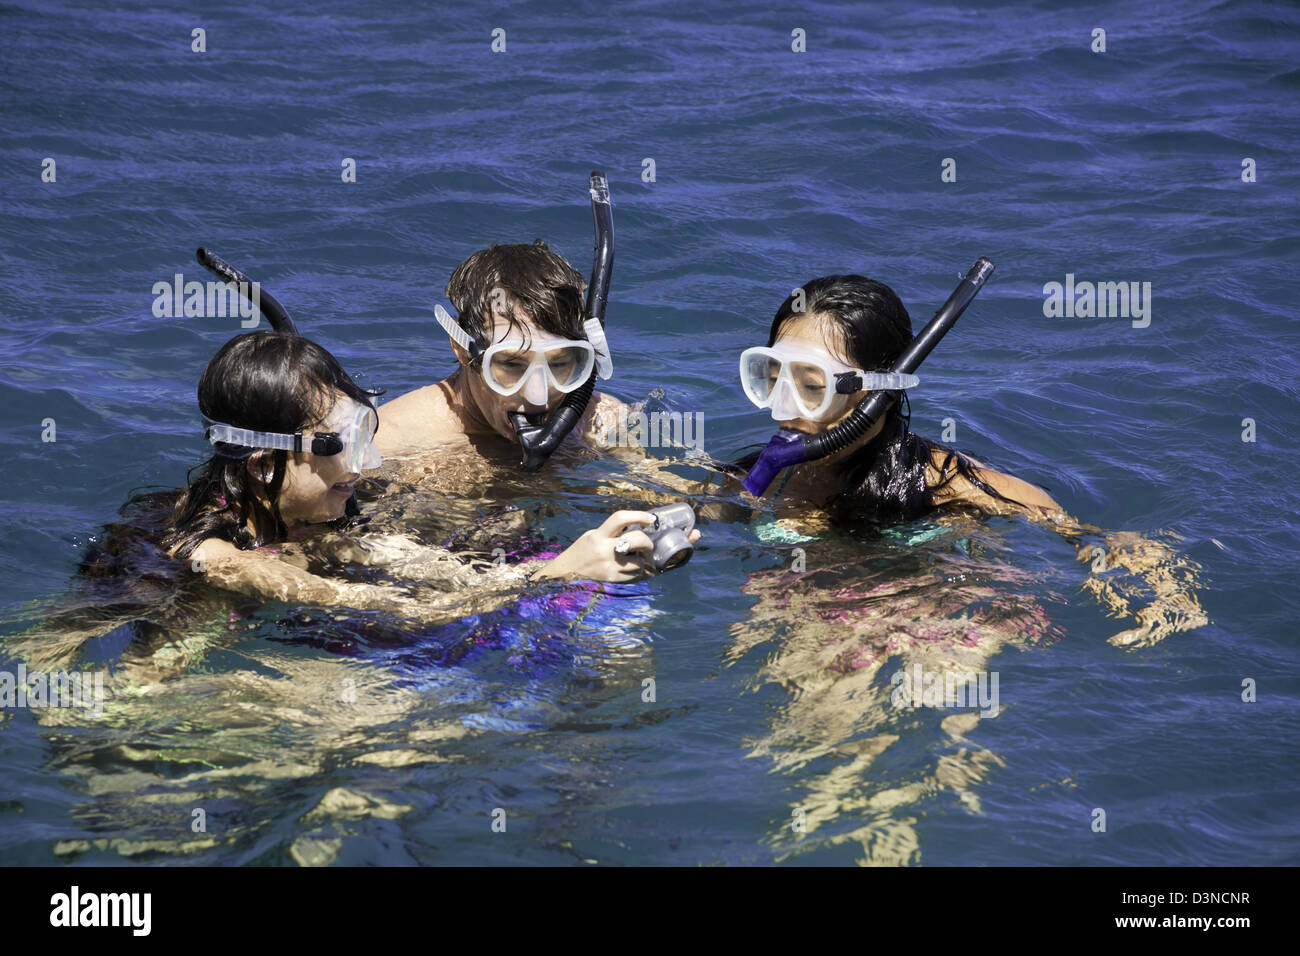 Three snorklers (MR) free diving off the island of Lanai, look at an image on their underwater digital camera, Lanai, Hawaii. Stock Photo